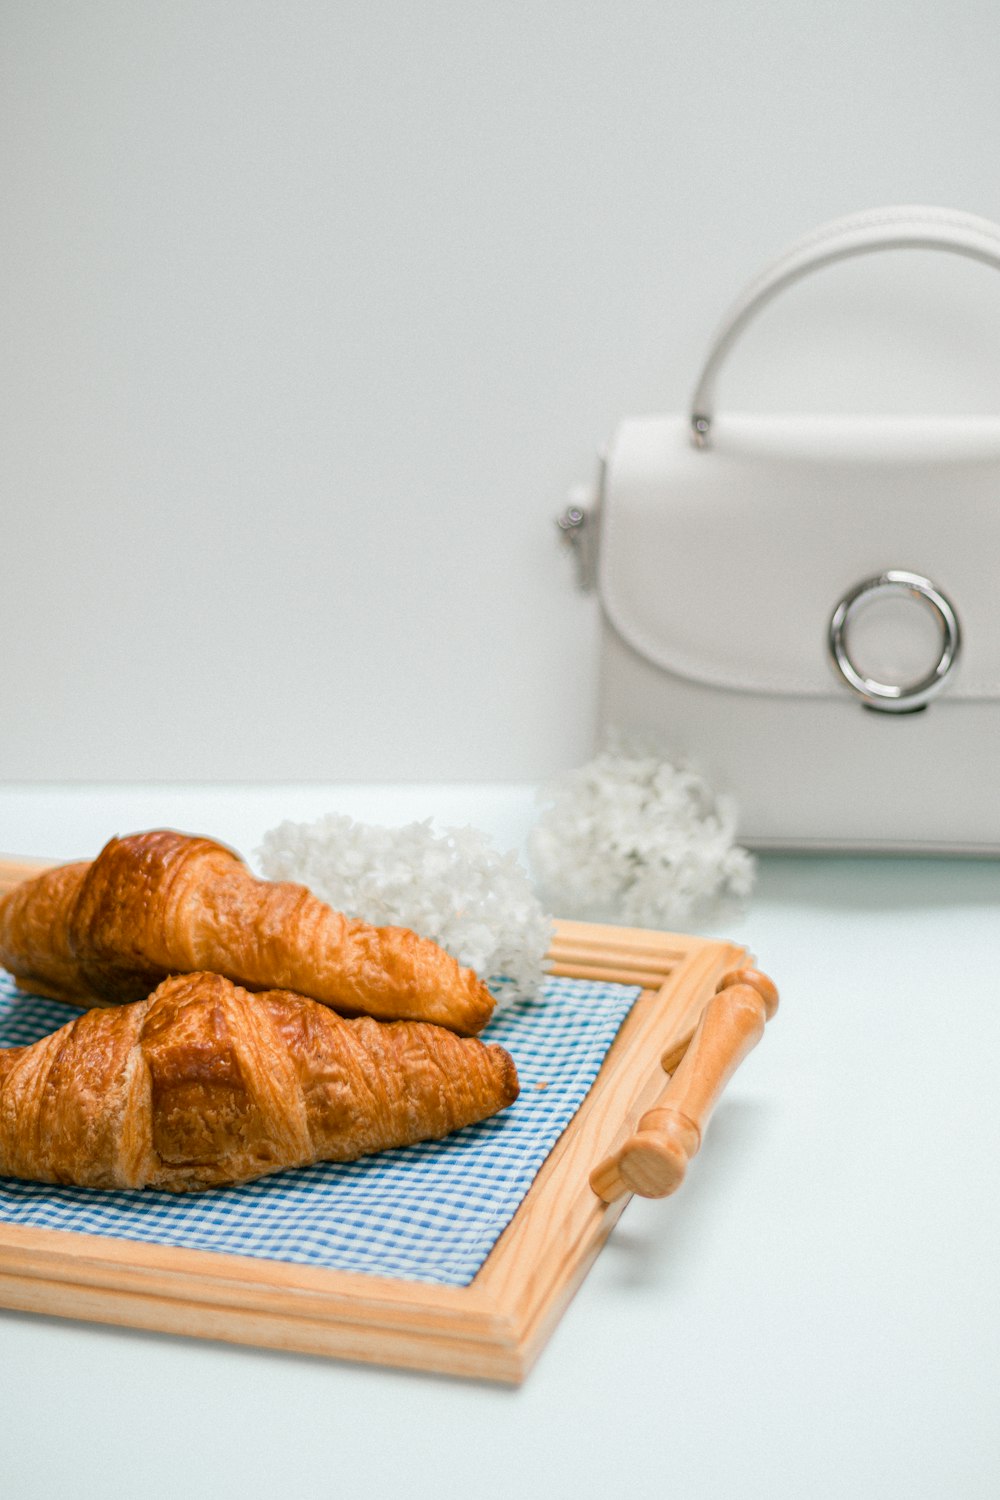 two croissants on a blue mat next to a white purse